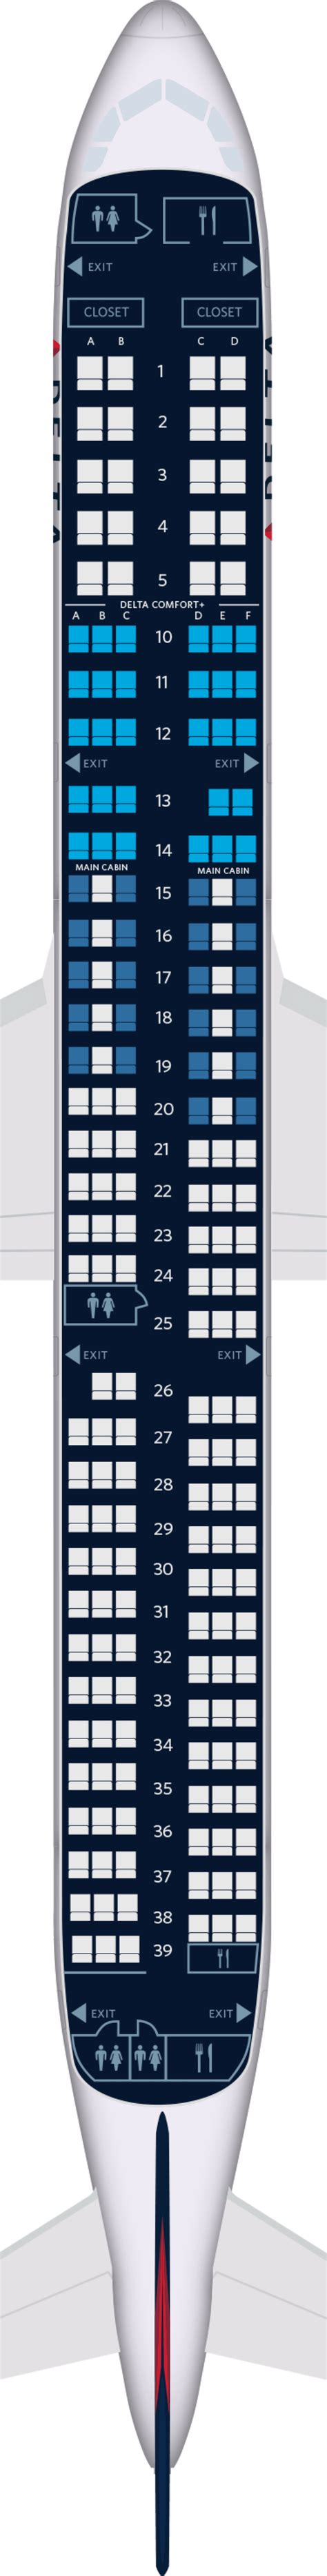 The Frontier Airbus A321 features 230 seats in a 2 cabin configuration. Economy has 212 seats in a 3-3 config; Premium economy has 18 seats in a 3-3 config; this is pretty standard for these aircraft. Legroom-wise, the Economy pitch of 28-29" is average, the Premium economy pitch of 36" is average, though of course what that means for you ...